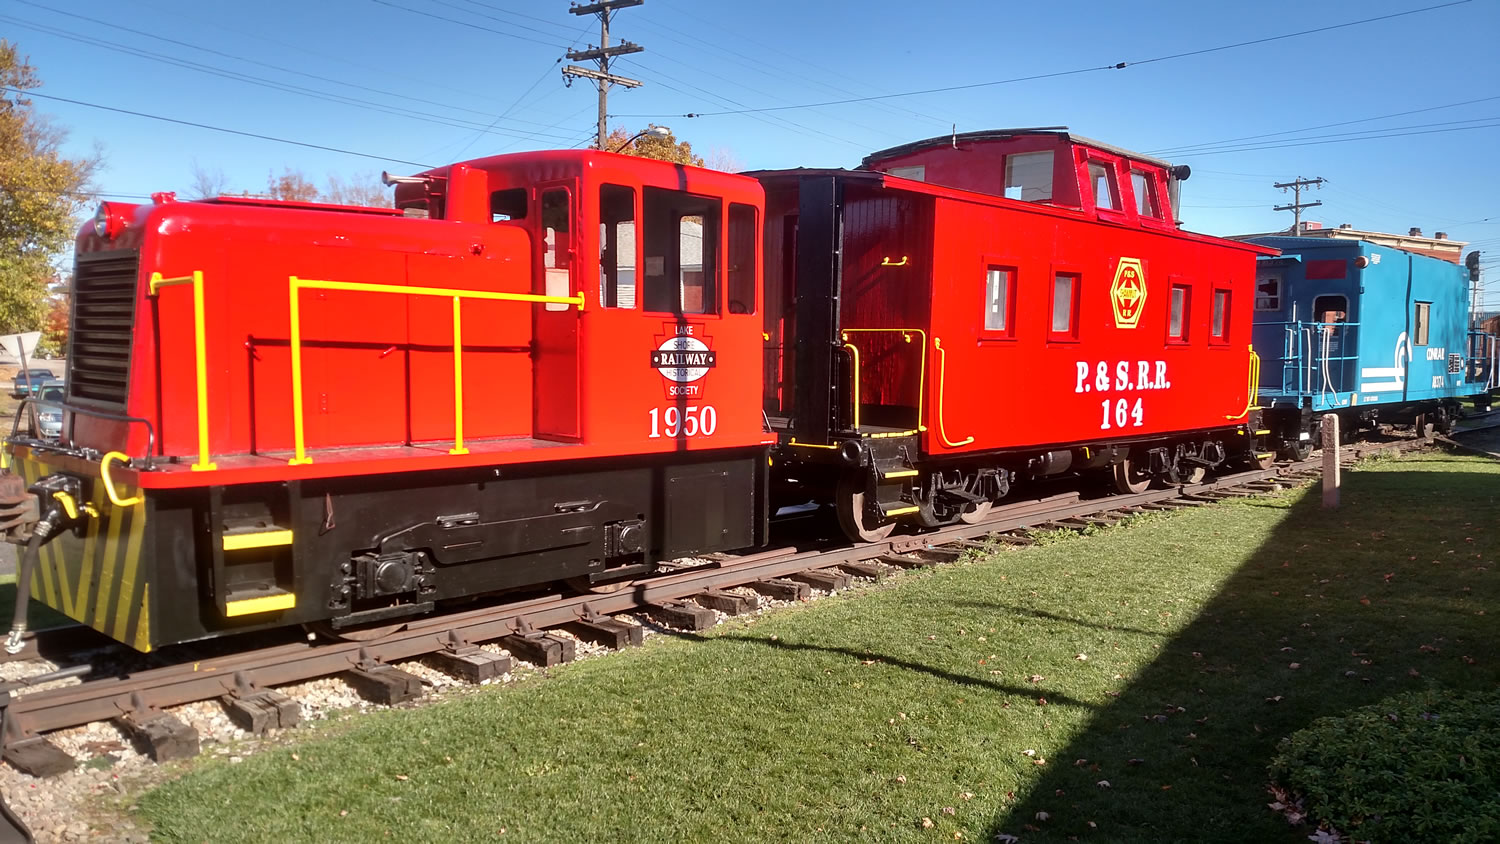 Our current front lineup at the Lake Shore Railway Museum. Our GE 25 tonner, the Pittsburg and Shawmut caboose and our latest addition , a Conrail caboose.